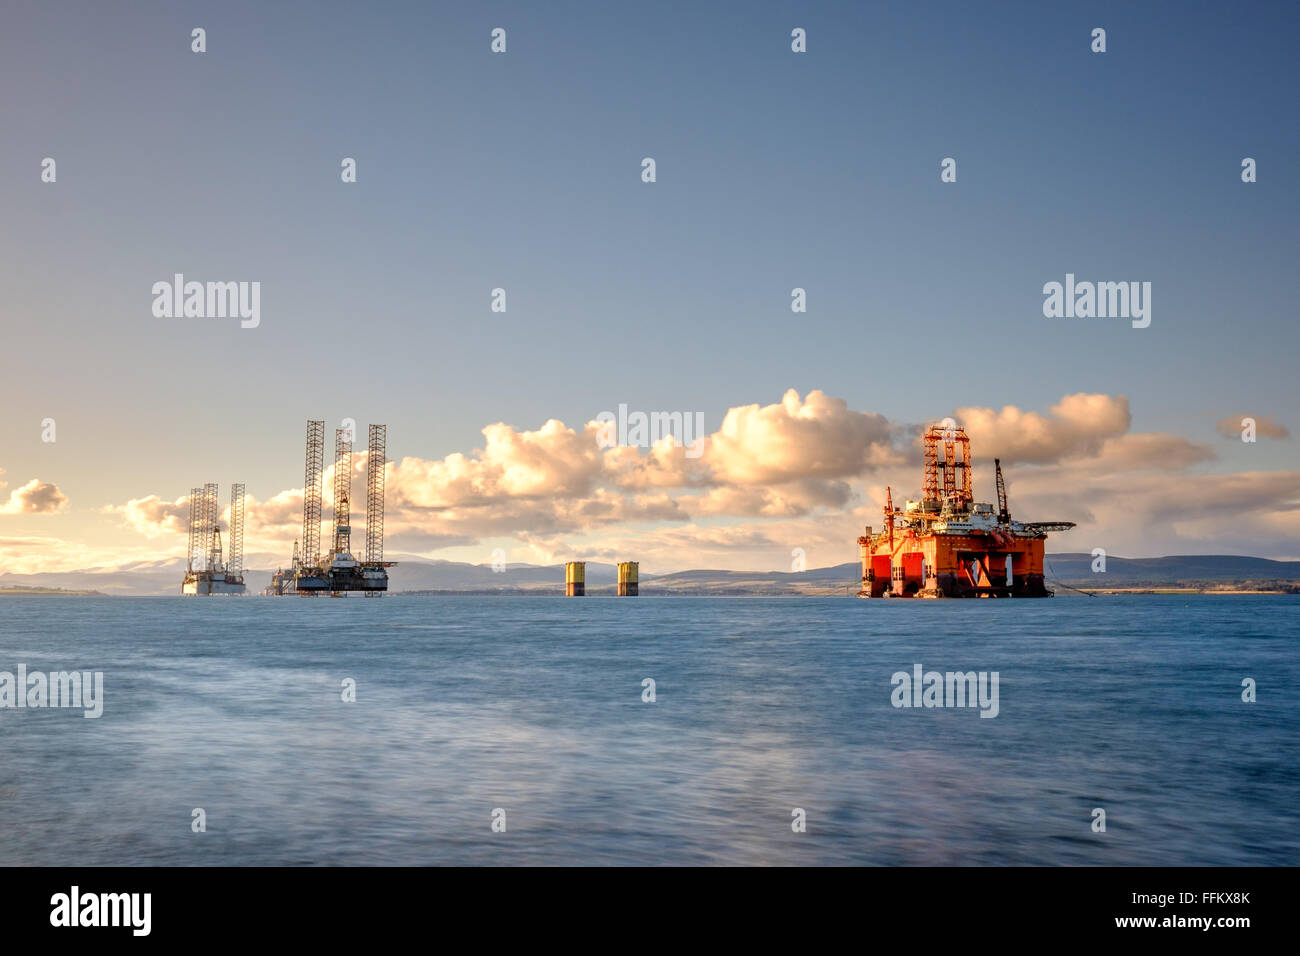 Three oil rigs float in the Cromarty Firth in northern Scotland as a seagull flies just above the horizon. Stock Photo